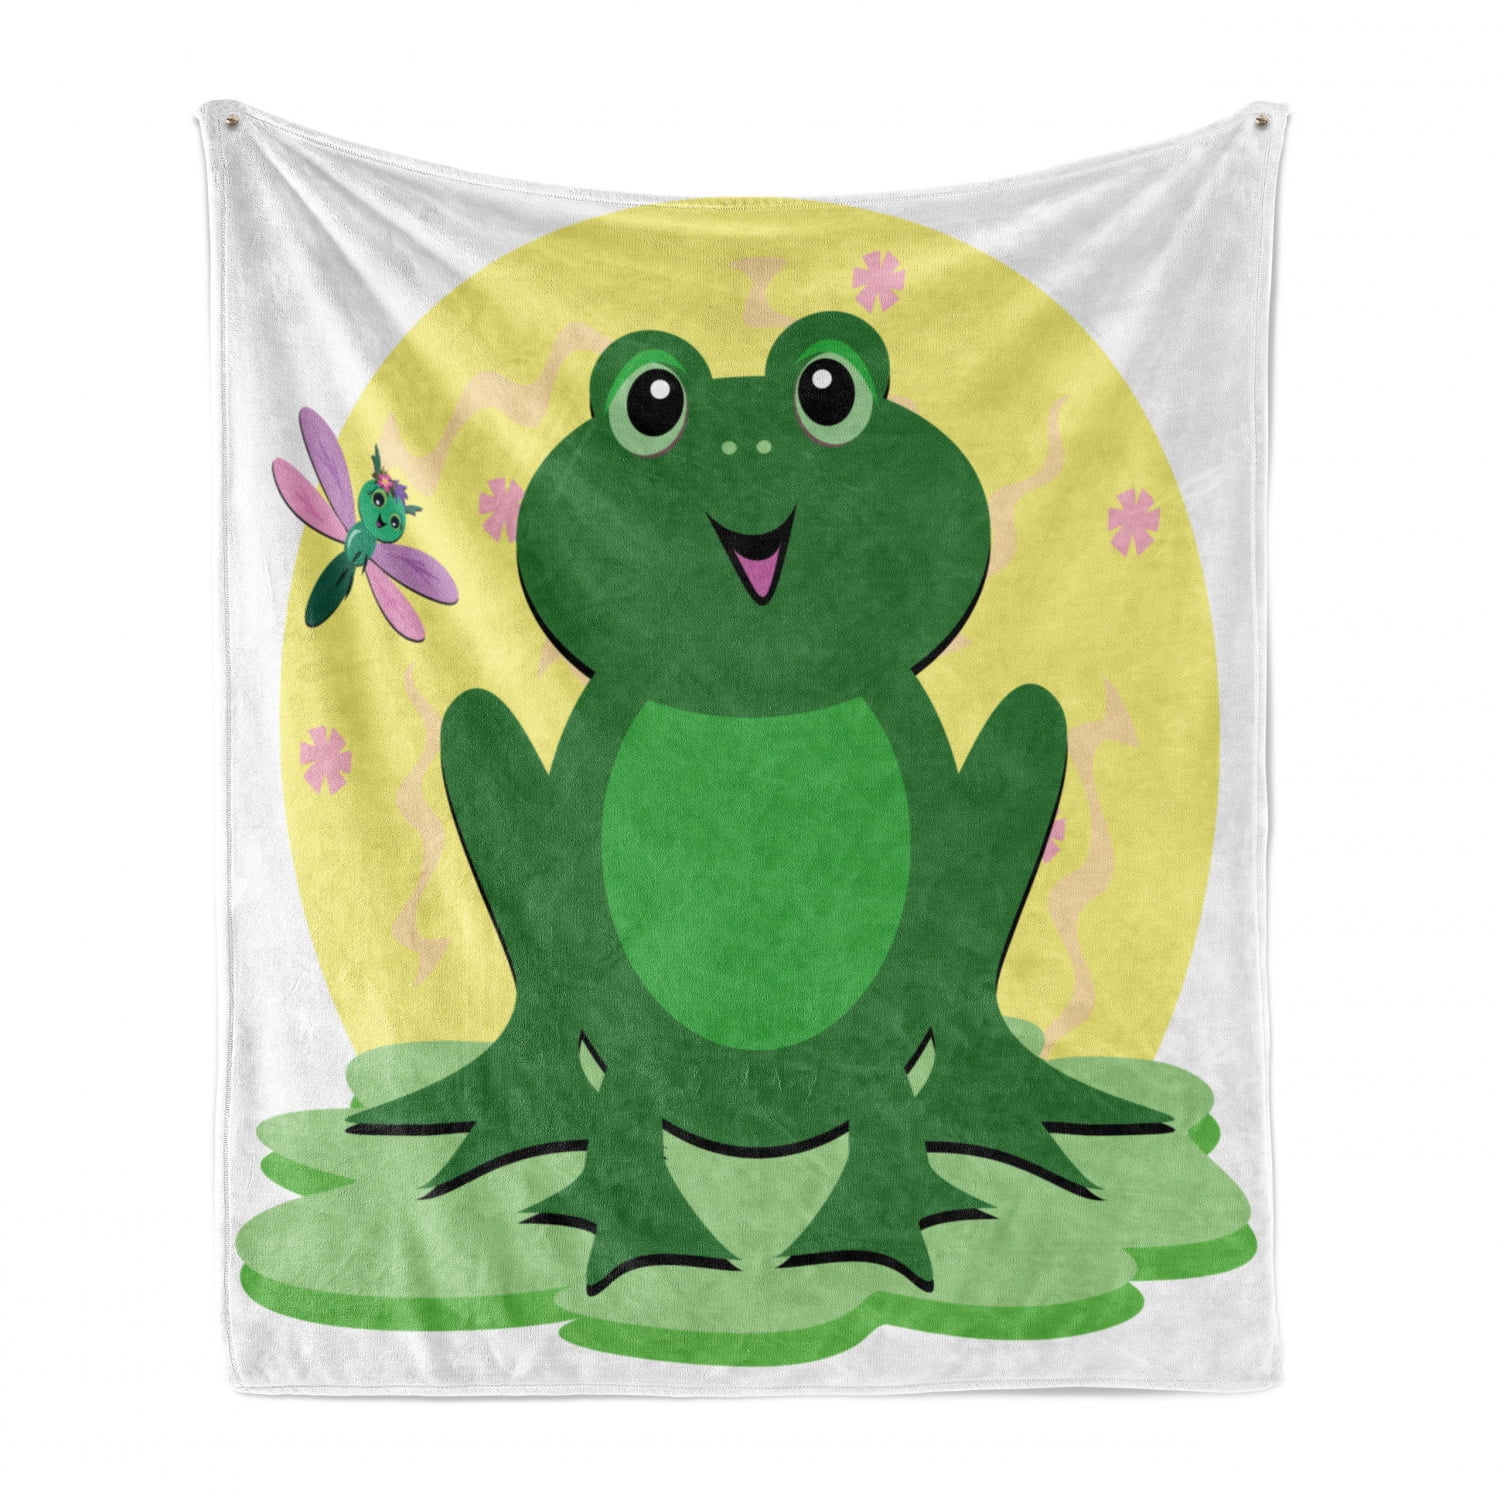 Throw Blanket Frogs Jumping Fleece Blankets Luxurious Lightweight Micro Flannel Blankets for Living Room,Sofa,Couch Warm Air Conditioning Blankets for Men and Women 